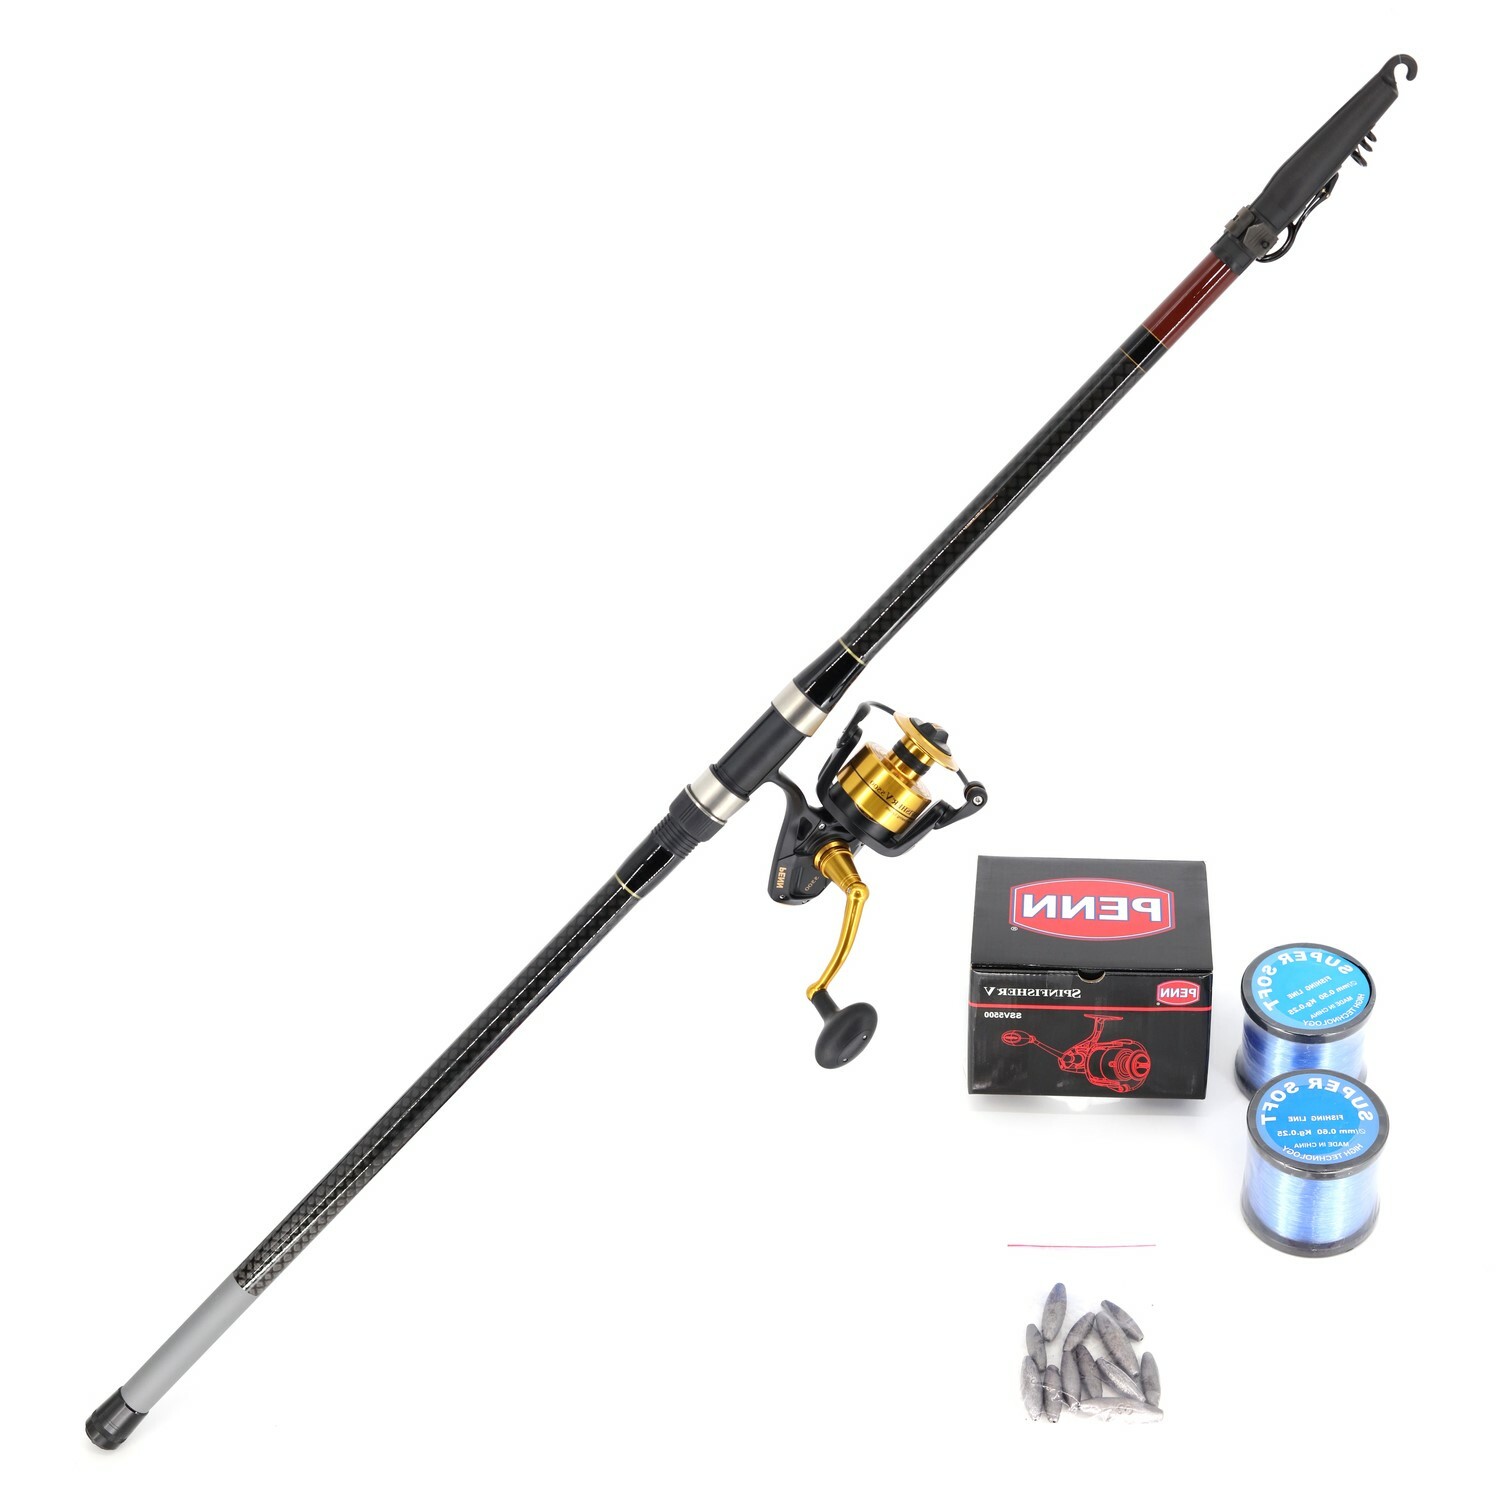 Shore Fishing (Pilot 4.5m and Penn V5500 including Nylon line with rigs and sinkers and snap swivels) Combo